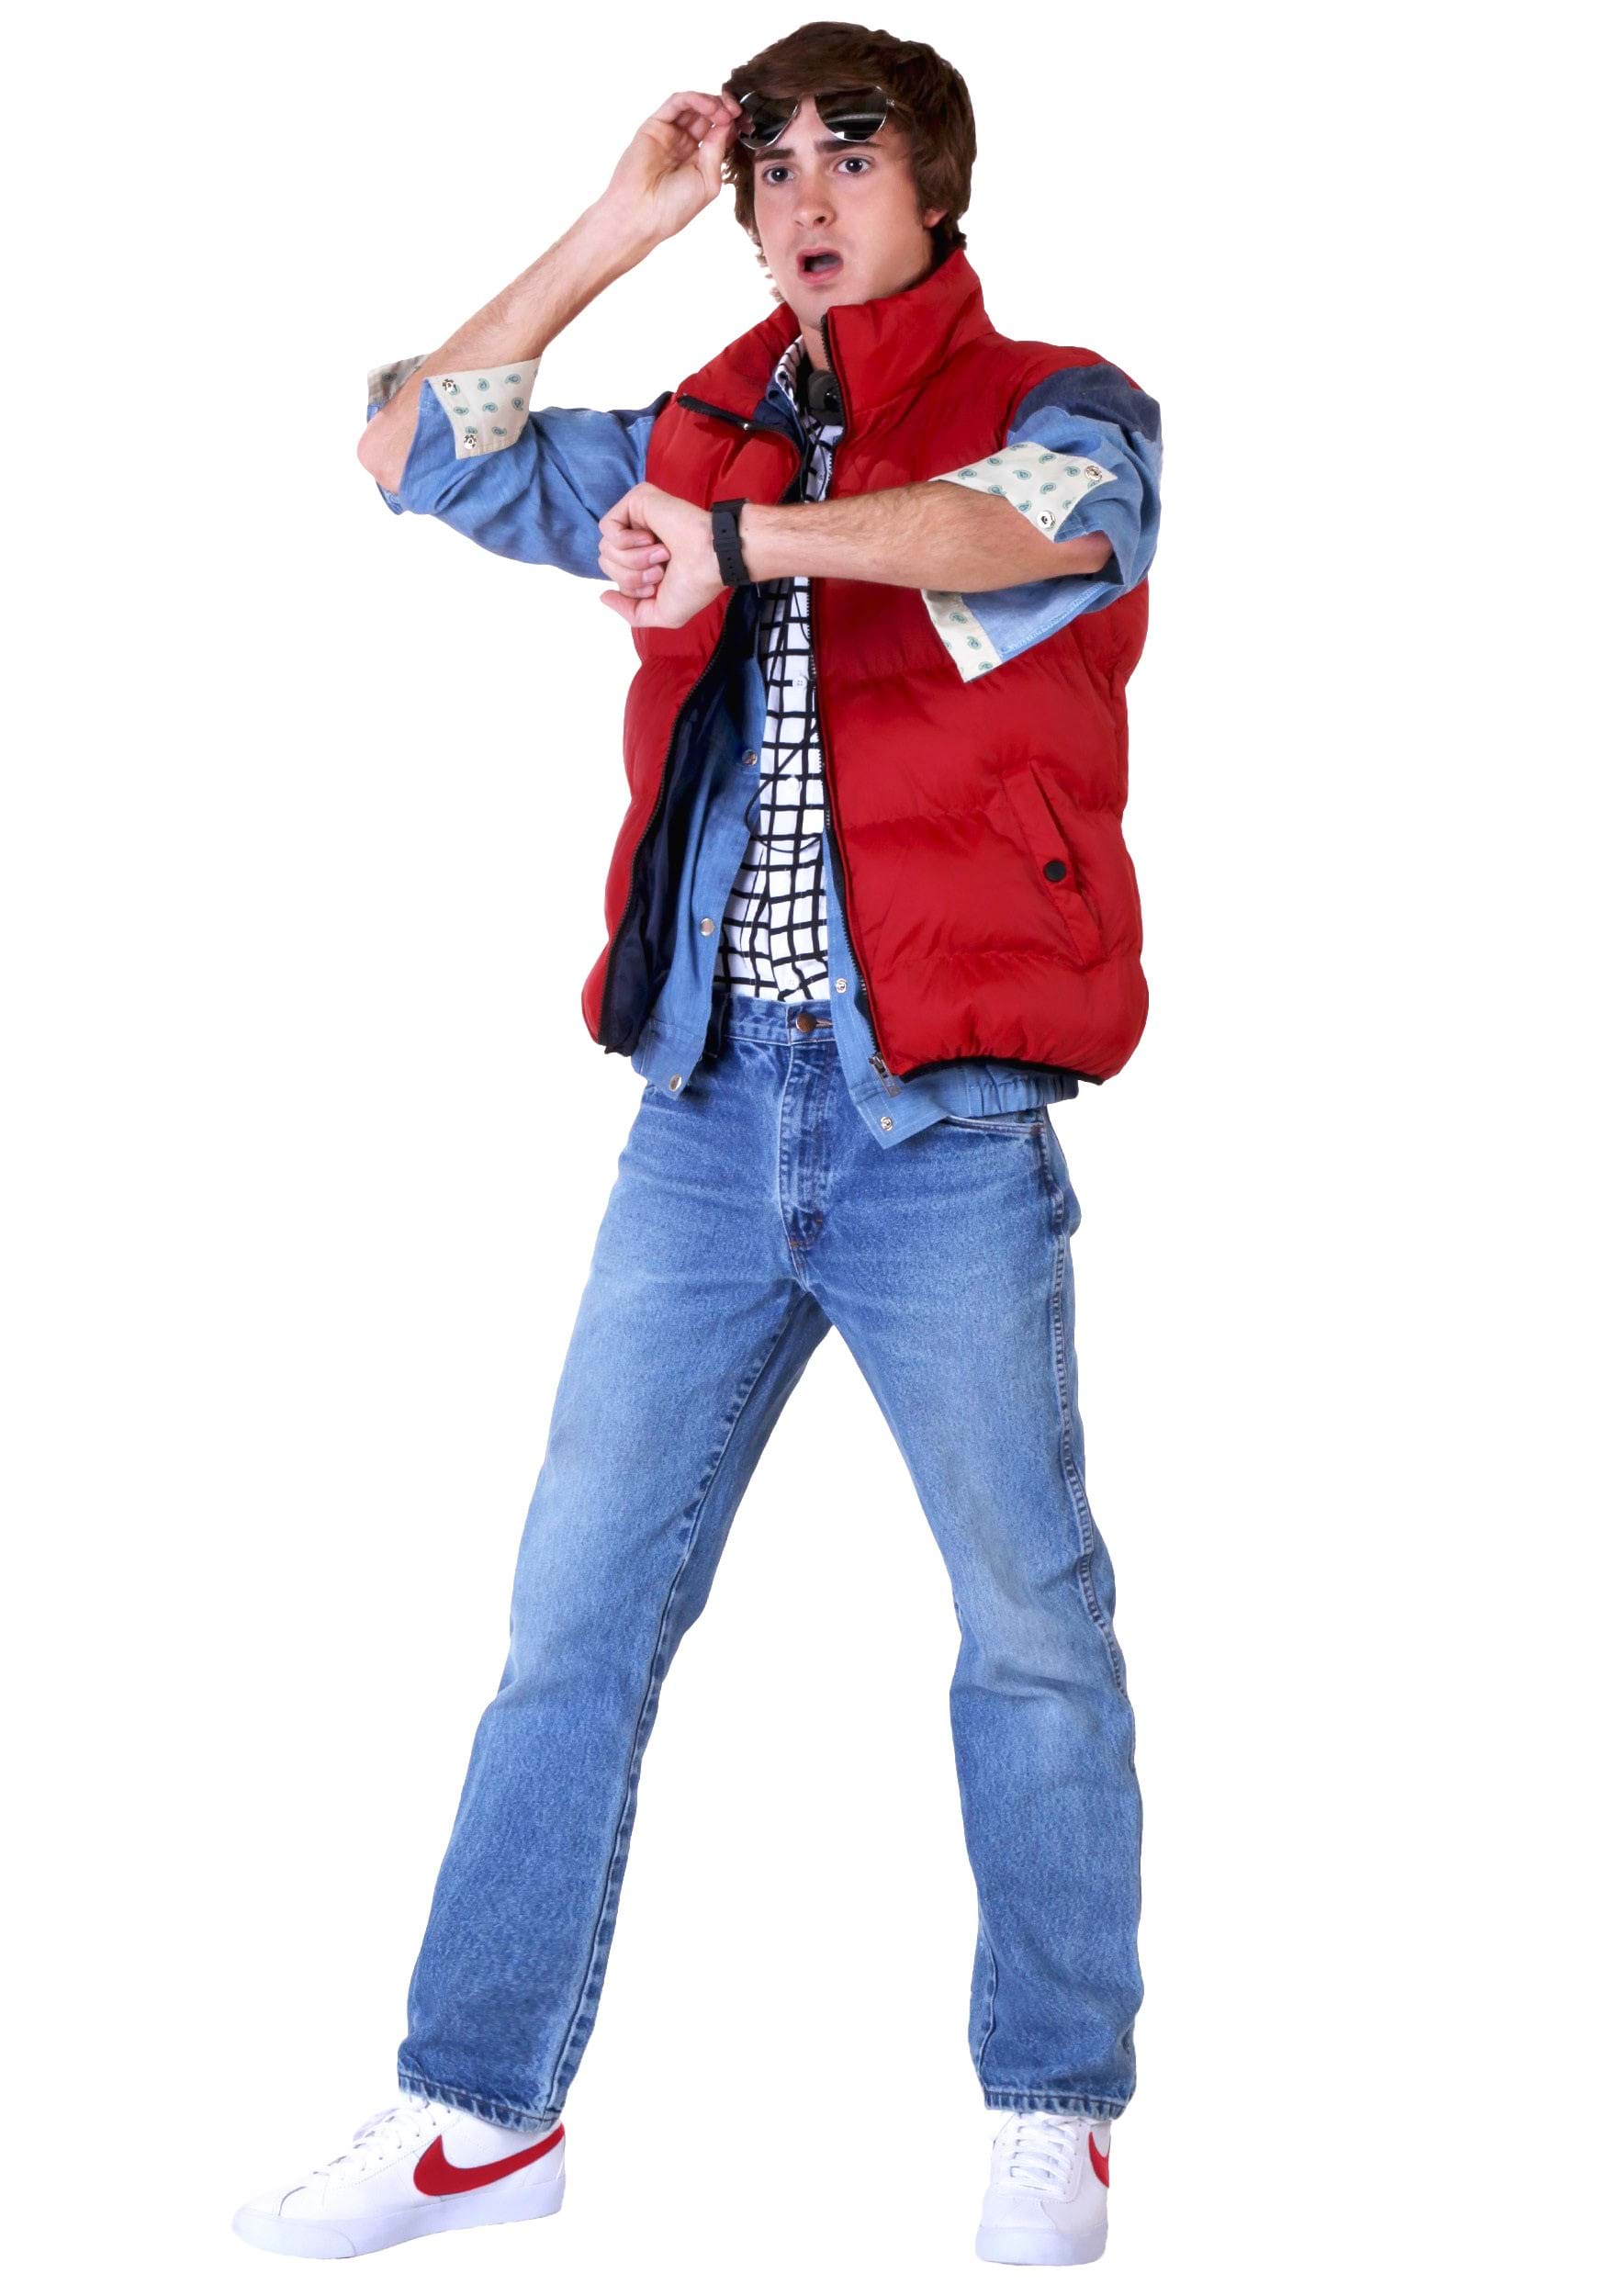 Marty McFly Back To The Future Fancy Dress Costume , 80s Movies Fancy Dress Costume